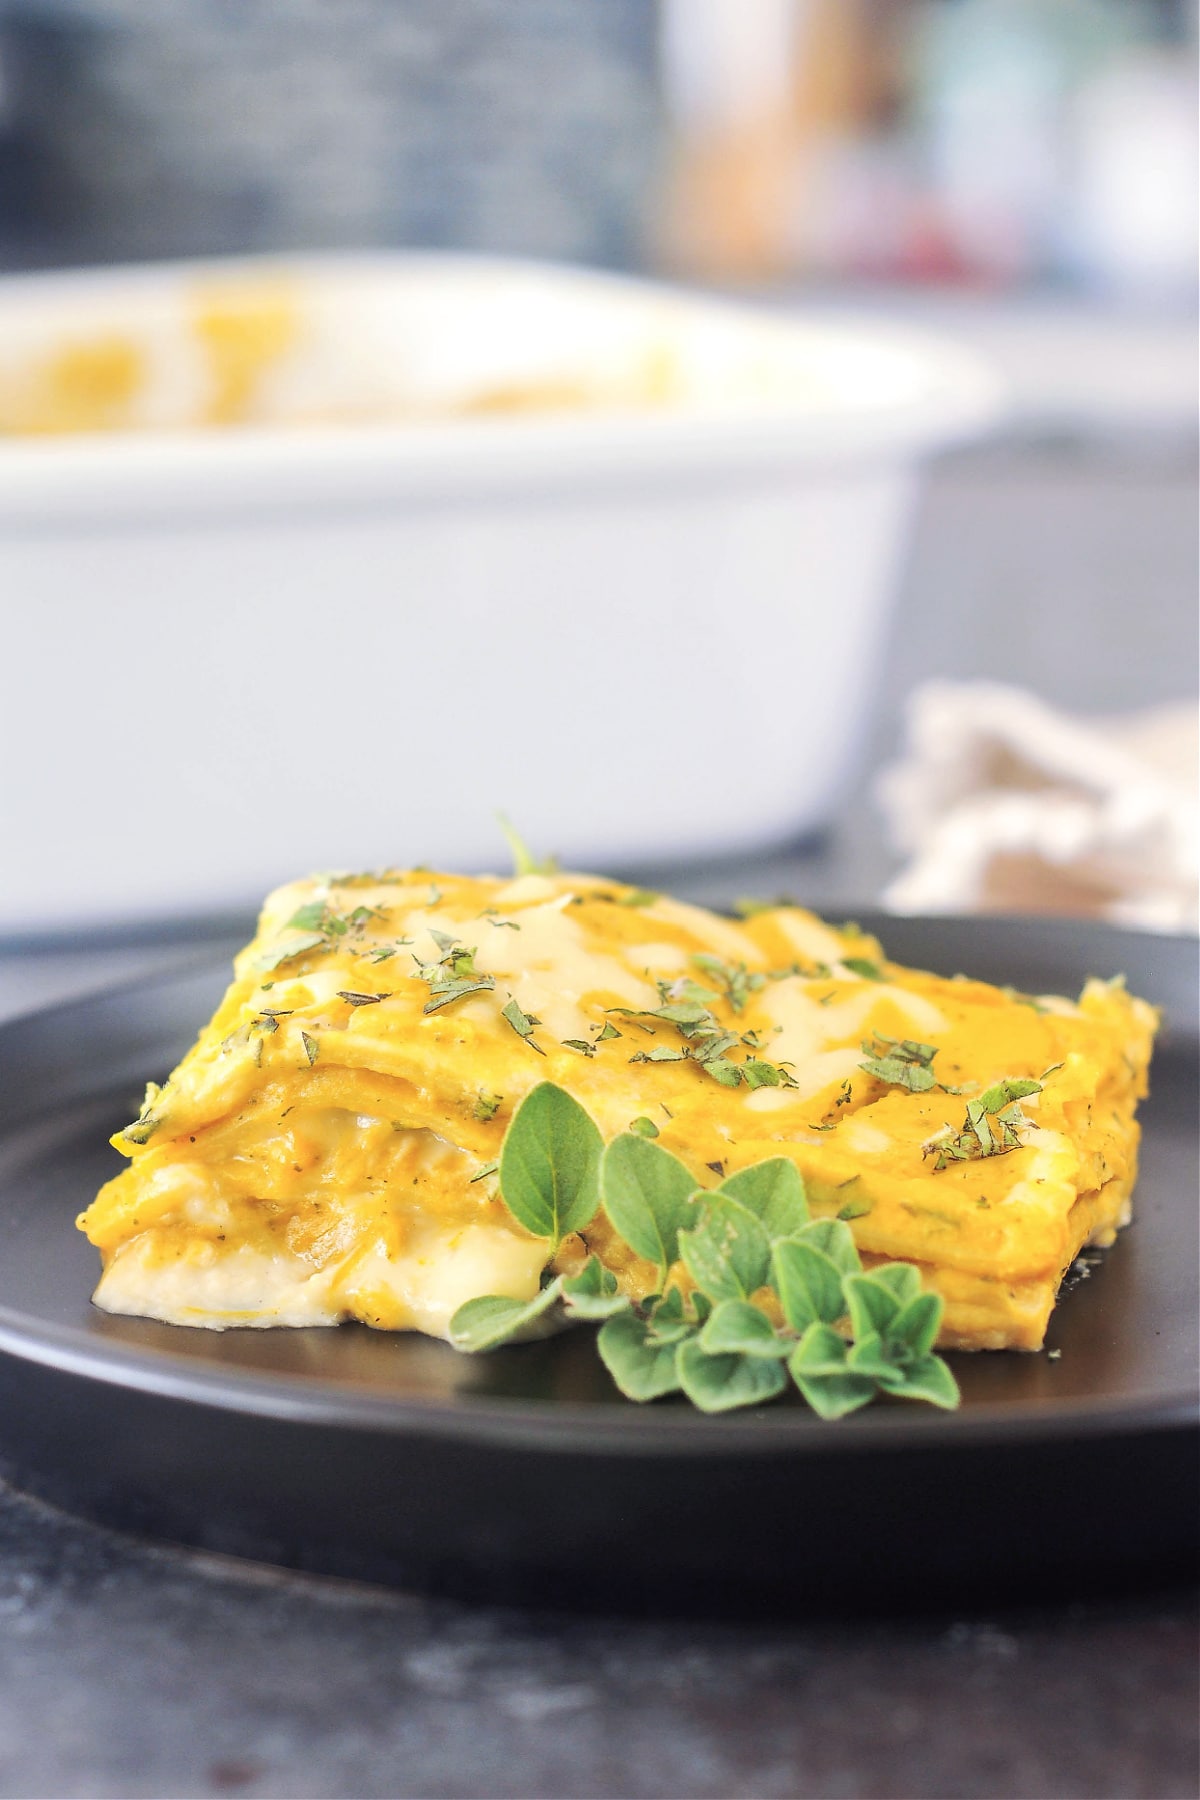 Side view of one serving of butternut sage lasagna on a matte black plate, with the white ceramic baking dish of lasagna blurred in the background. Lasagna is garnished with chopped fresh oregano and one whole sprig of oregano.